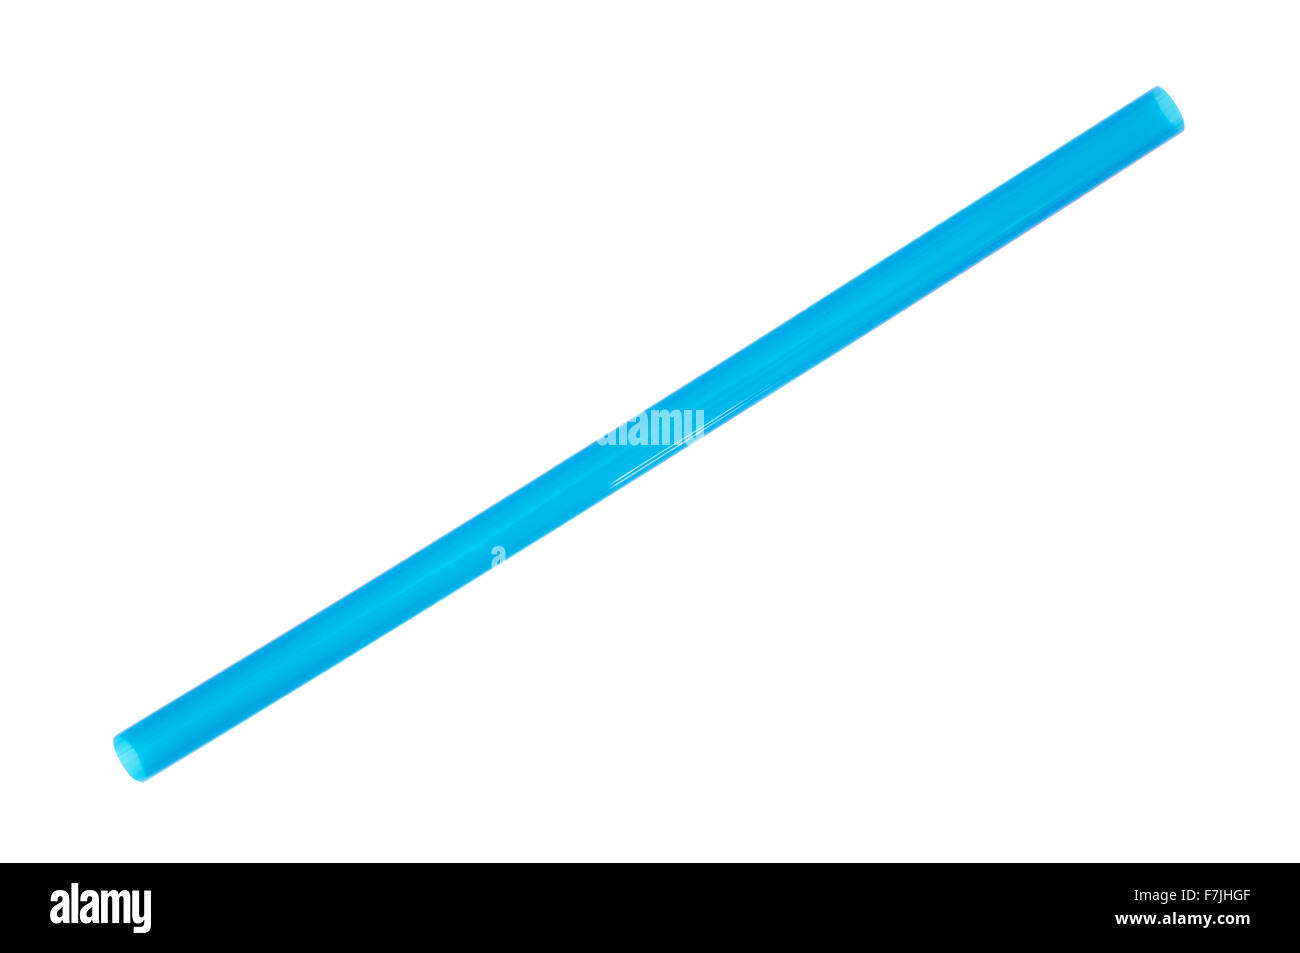 A jumbo sized blue drinking straw for smoothies and milkshakes isolated on a white background. Stock Photo